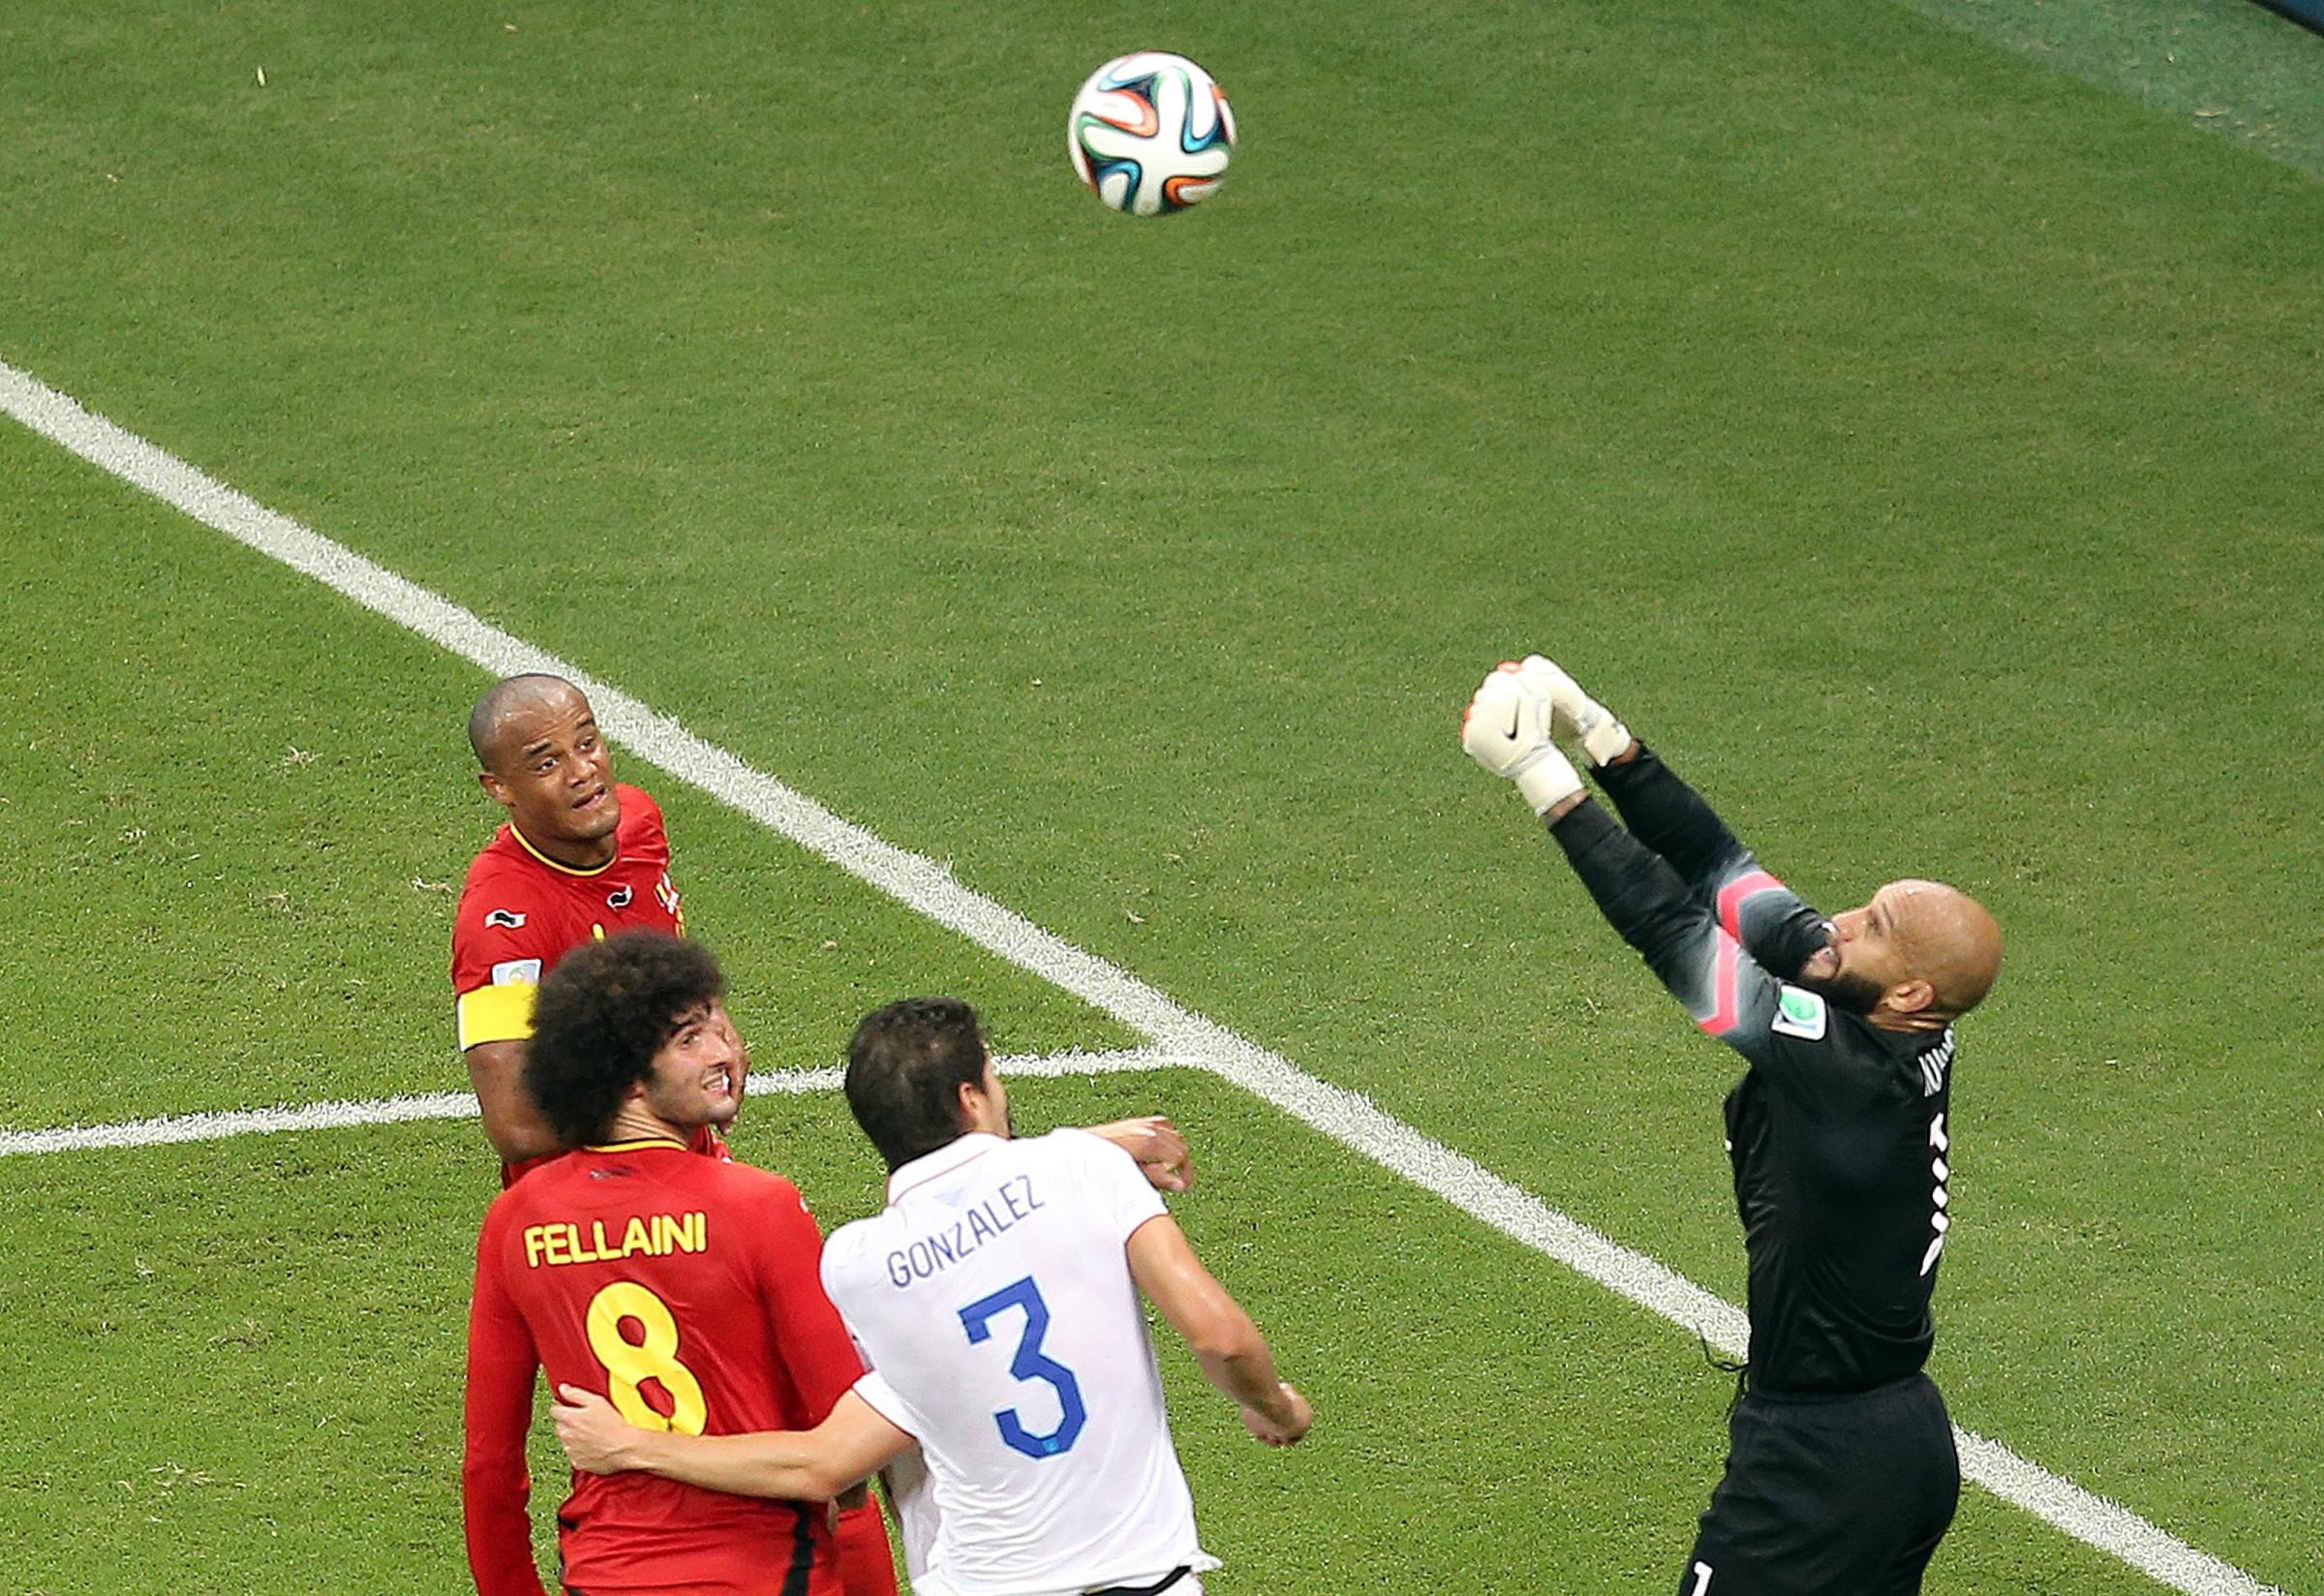 Goalkeeper Tim Howard of the USA (R) makes a save during a cooling break during the FIFA World Cup 2014 round of 16 match between Belgium and the USA at the Arena Fonte Nova in Salvador, Brazil on July 1, 2014.